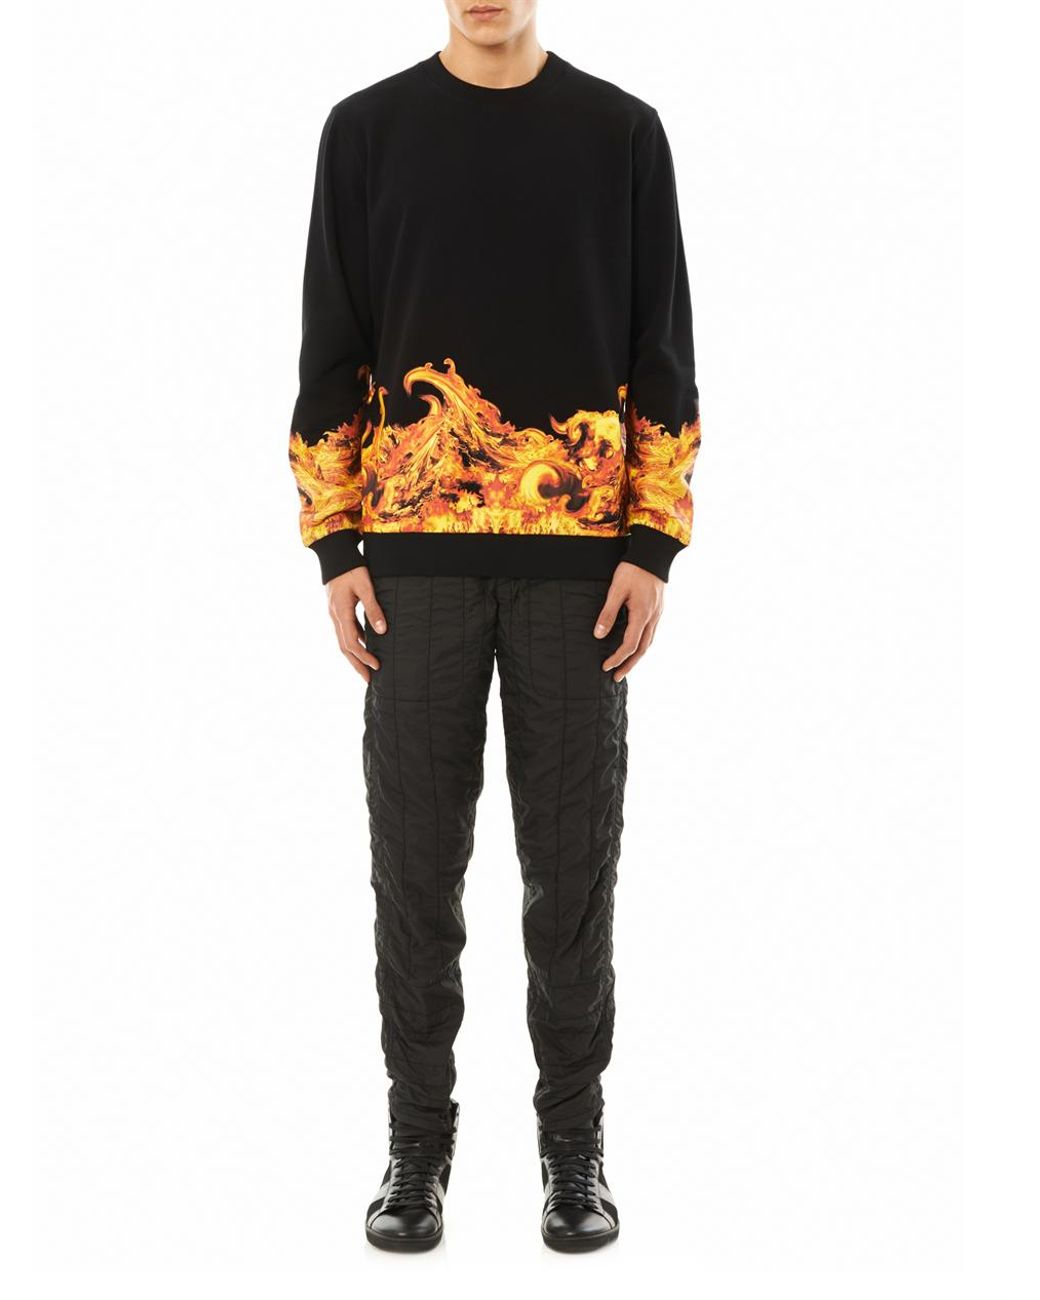 Givenchy Flame Print Sweatshirt in Black for Men | Lyst